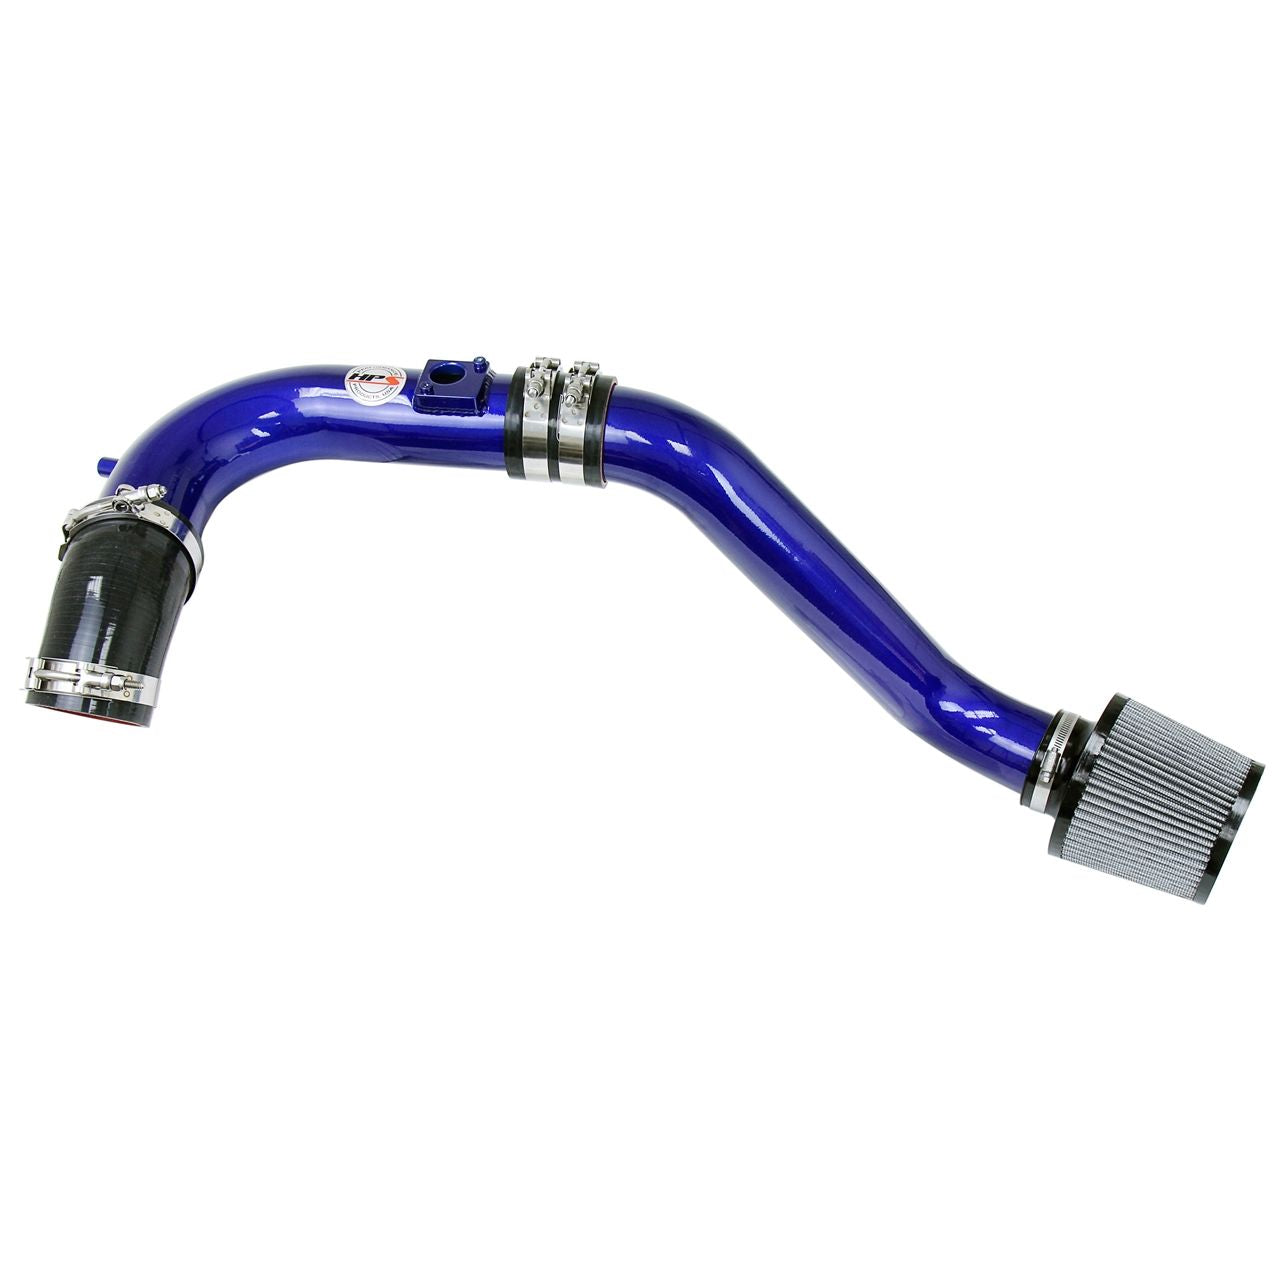 HPS Cold Air Intake Kit 09-14 Acura TSX 2.4L, Converts to Shortram, Blue